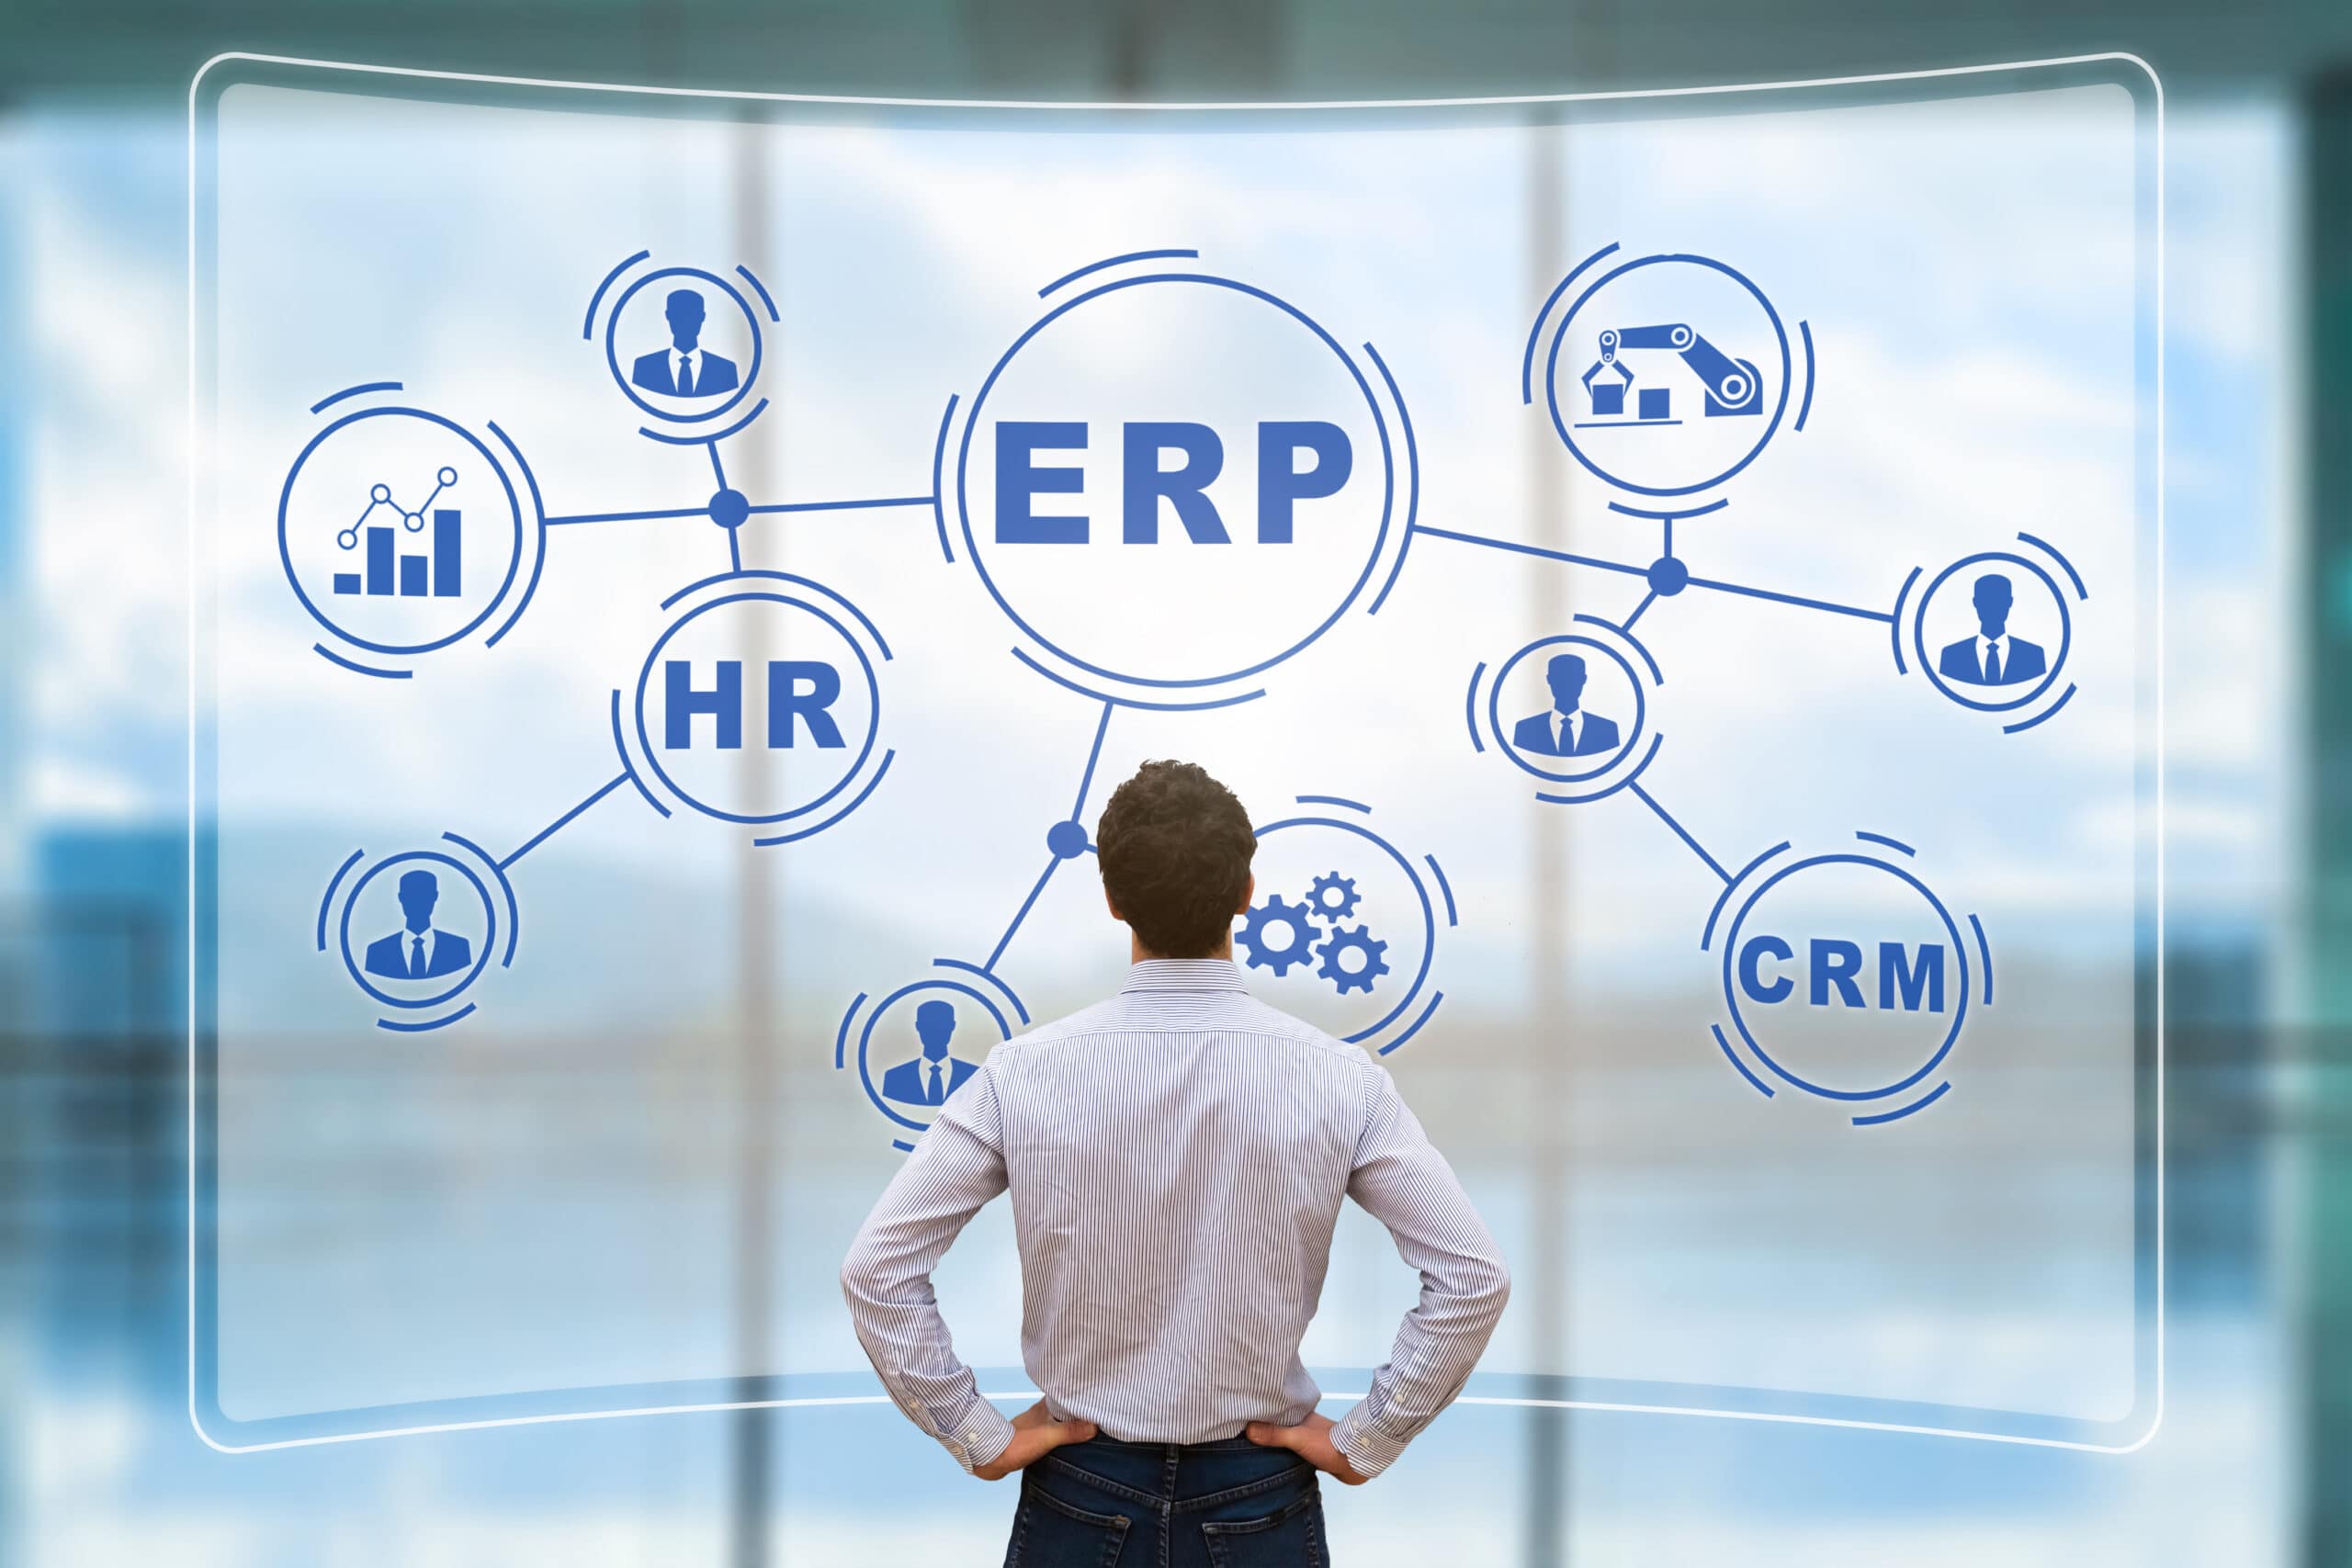 Buy the Best ERP Software - Use these incredible tips